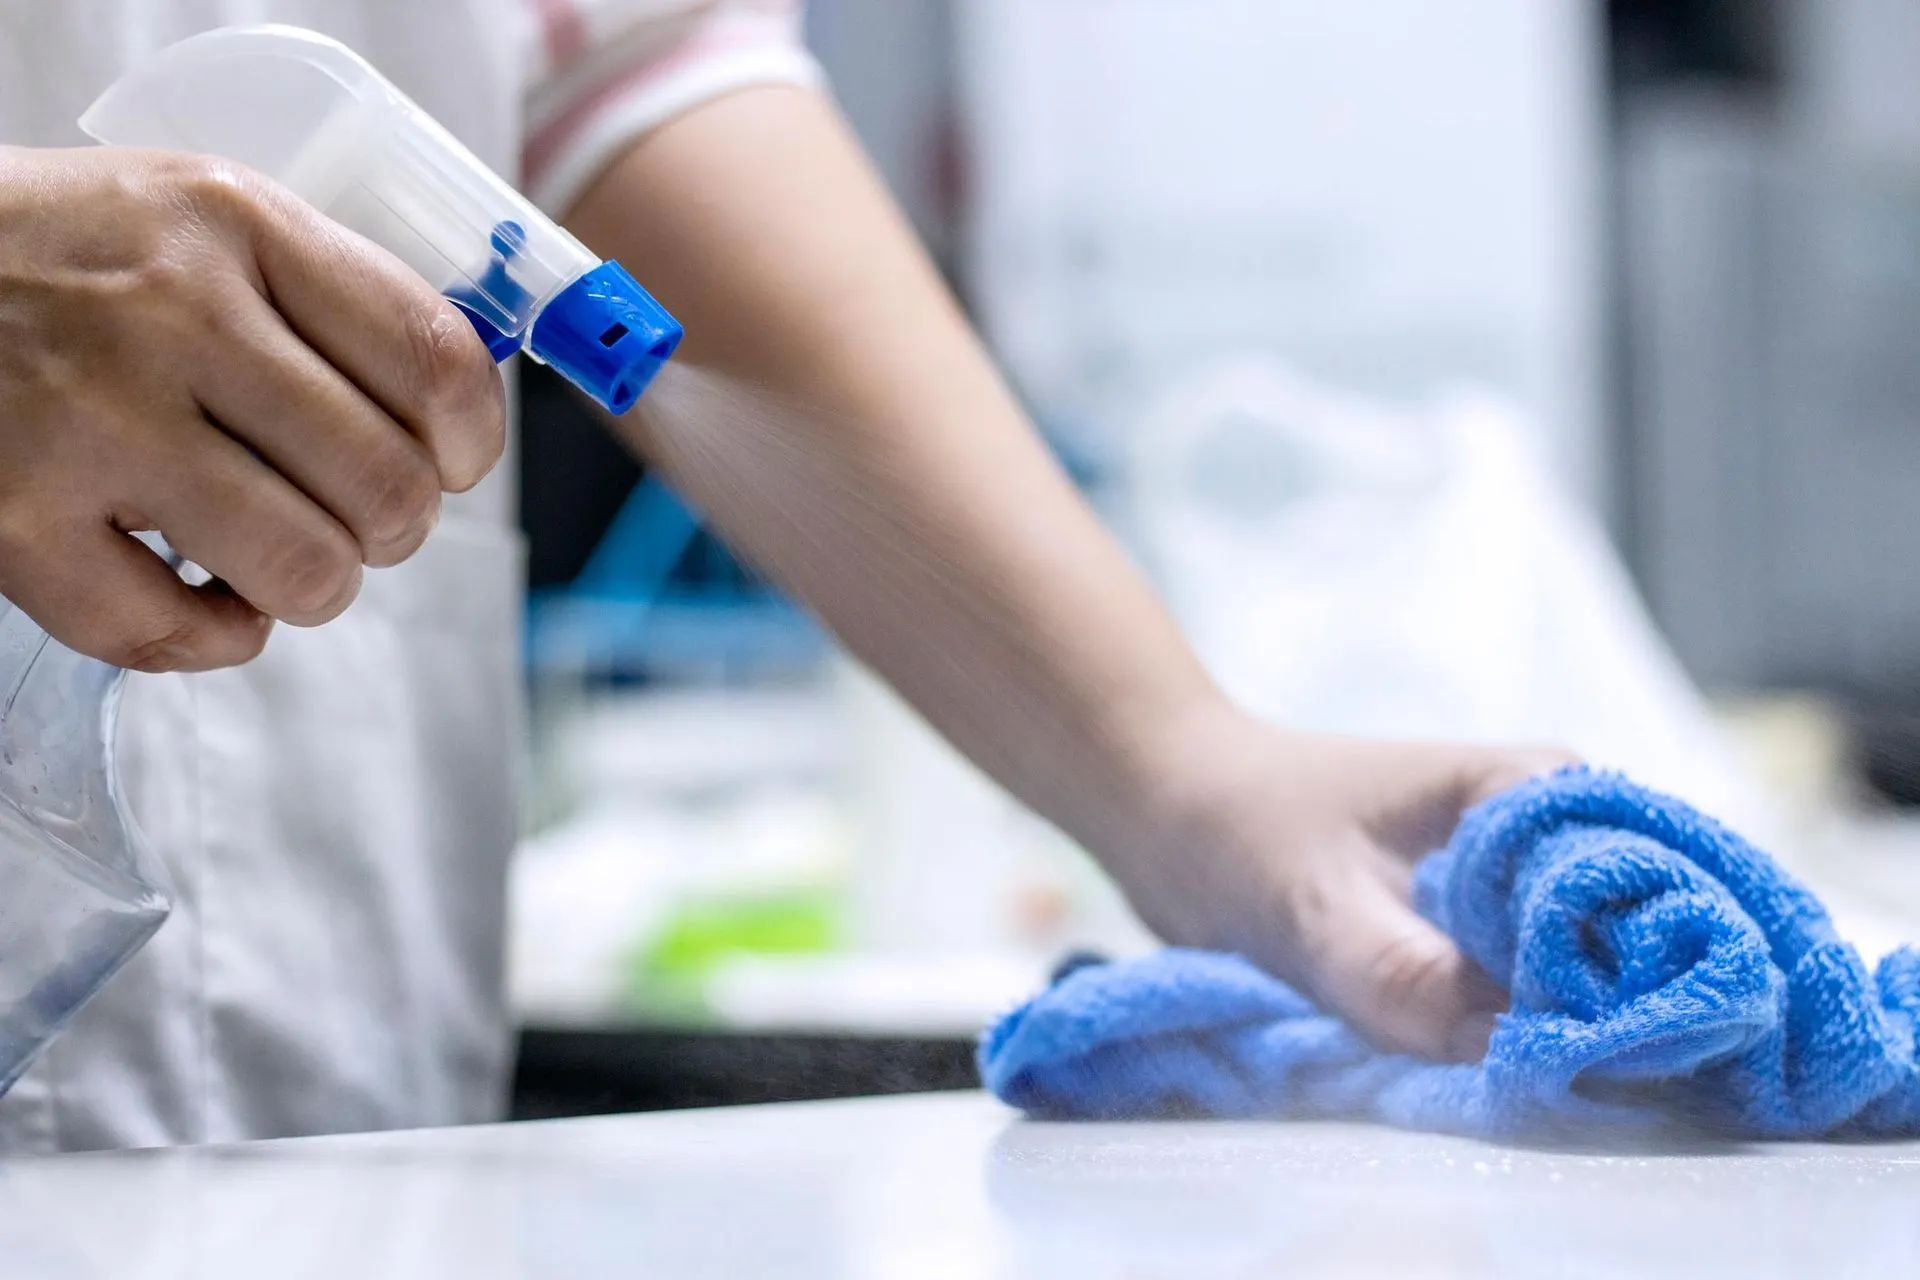 a person is cleaning a table with a spray bottle and a towel